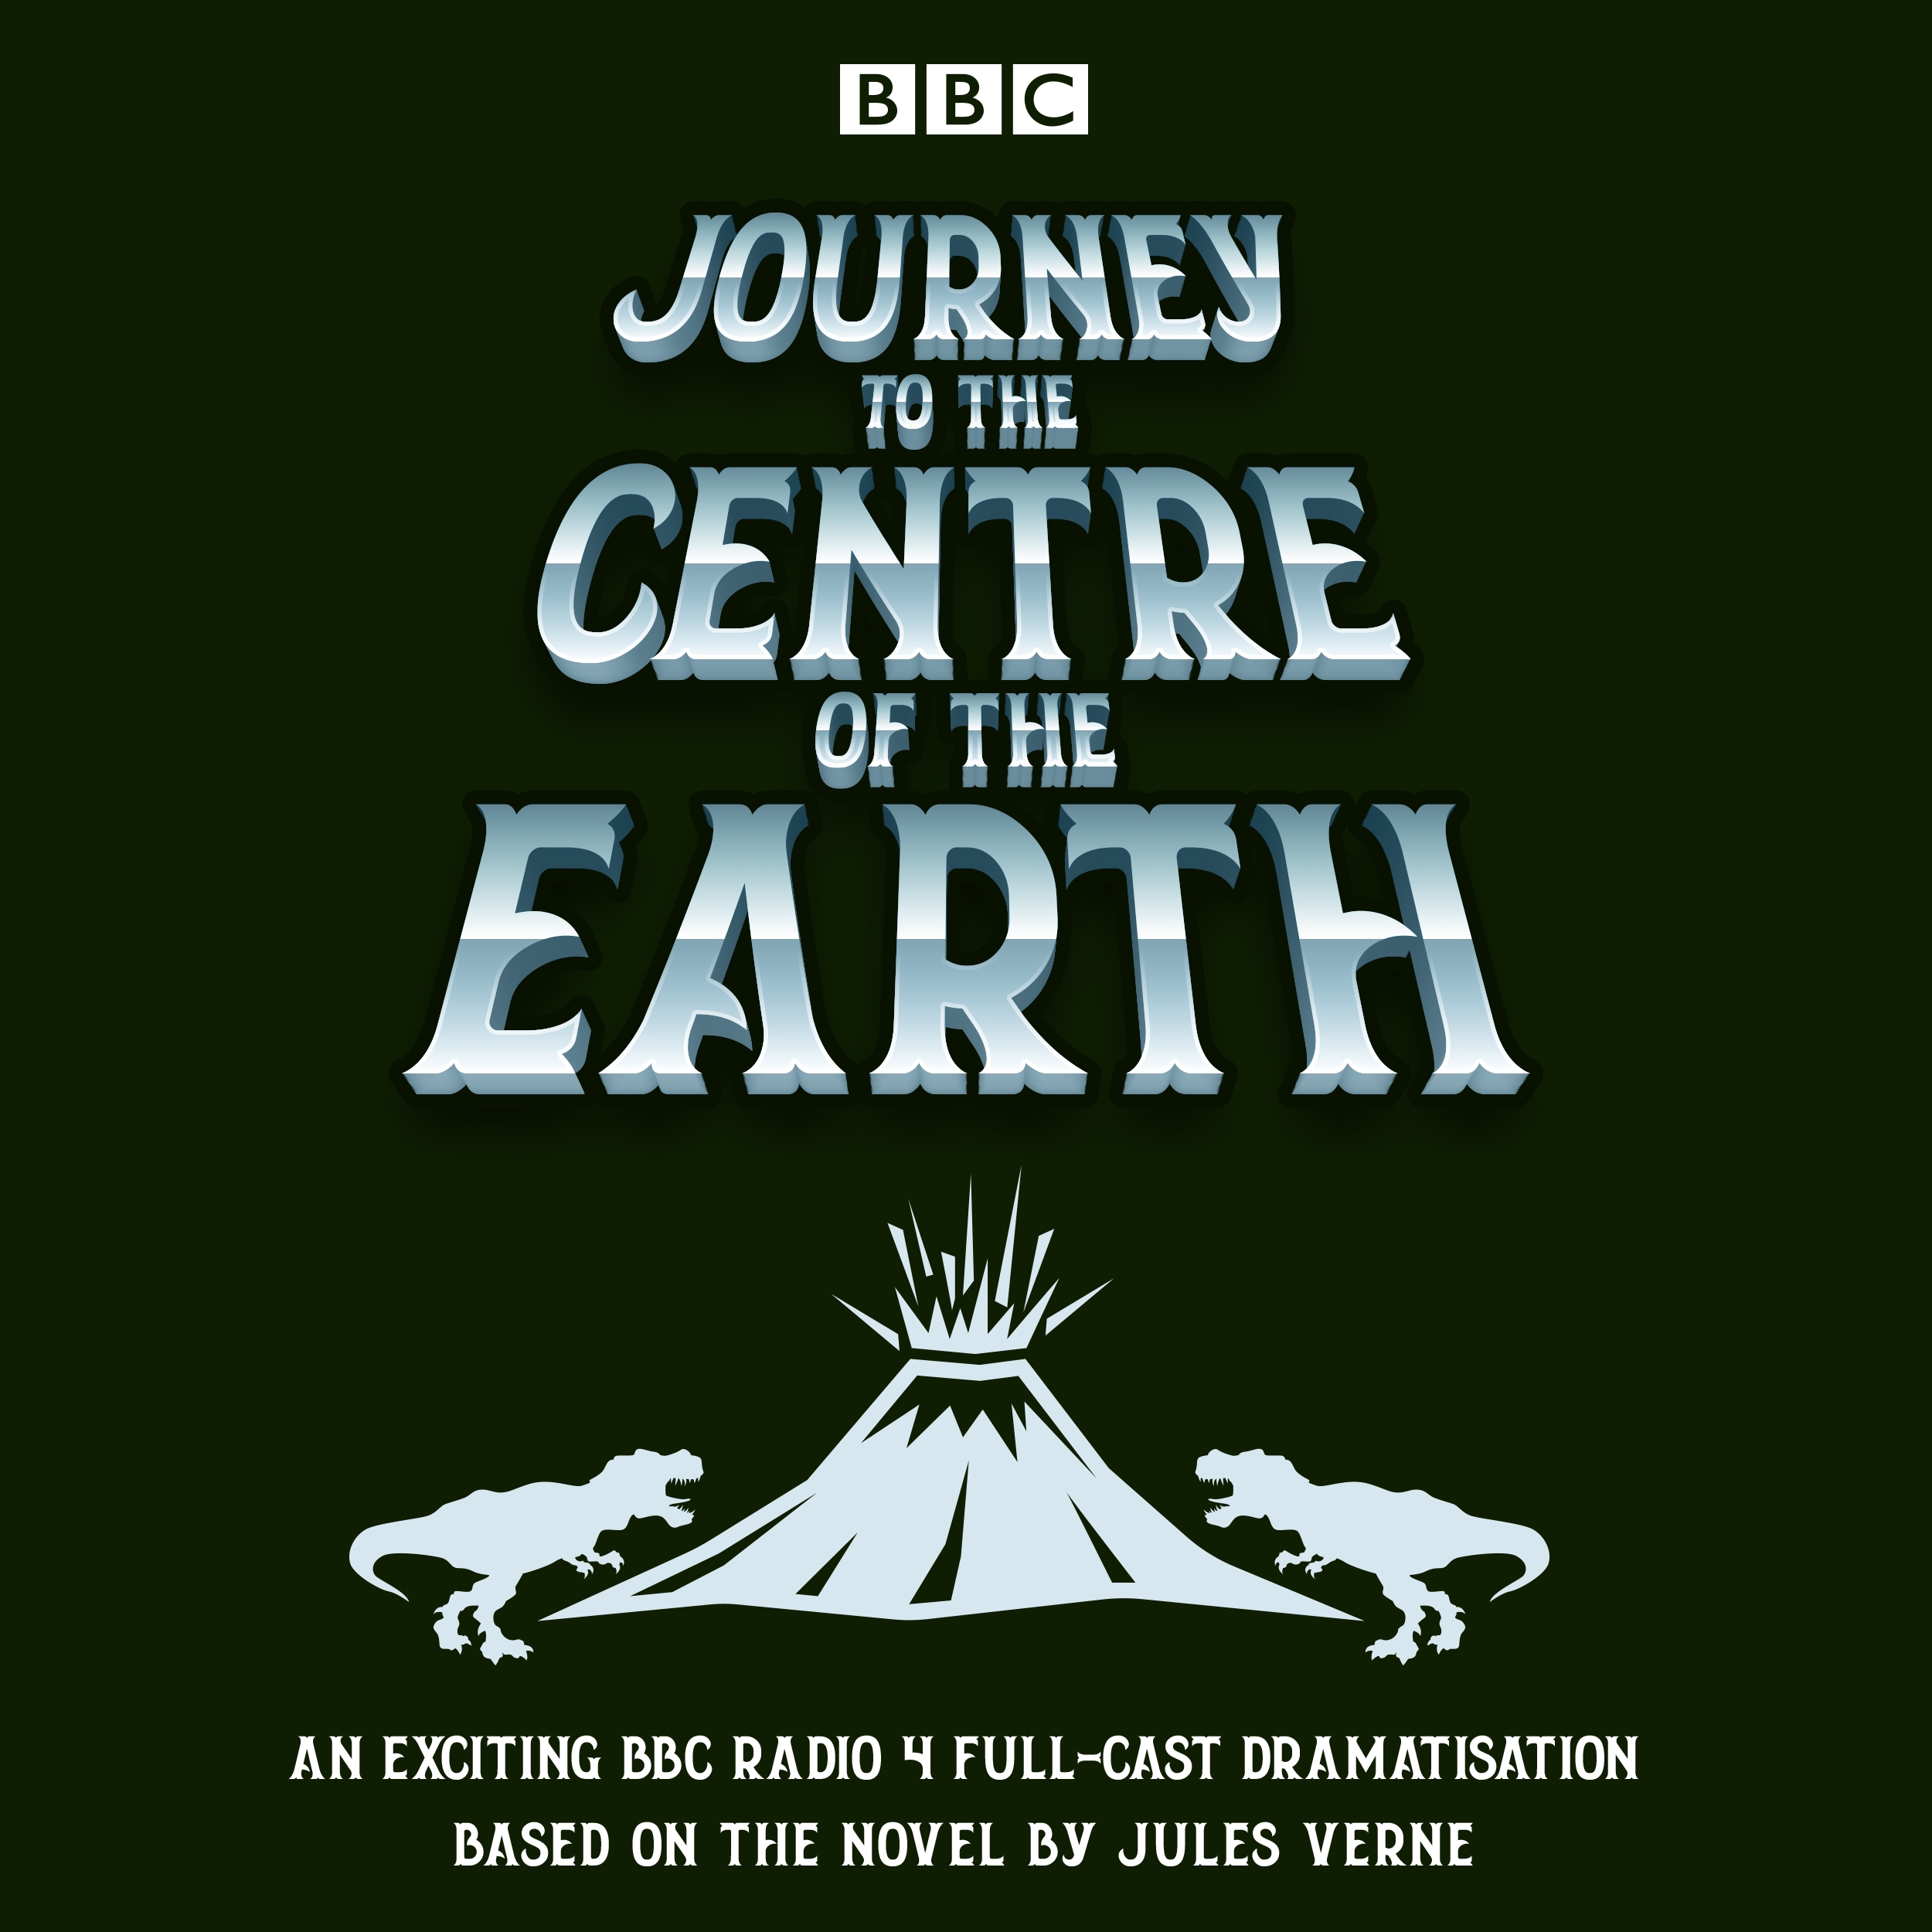 journey to the center of the earth chapter 4 summary